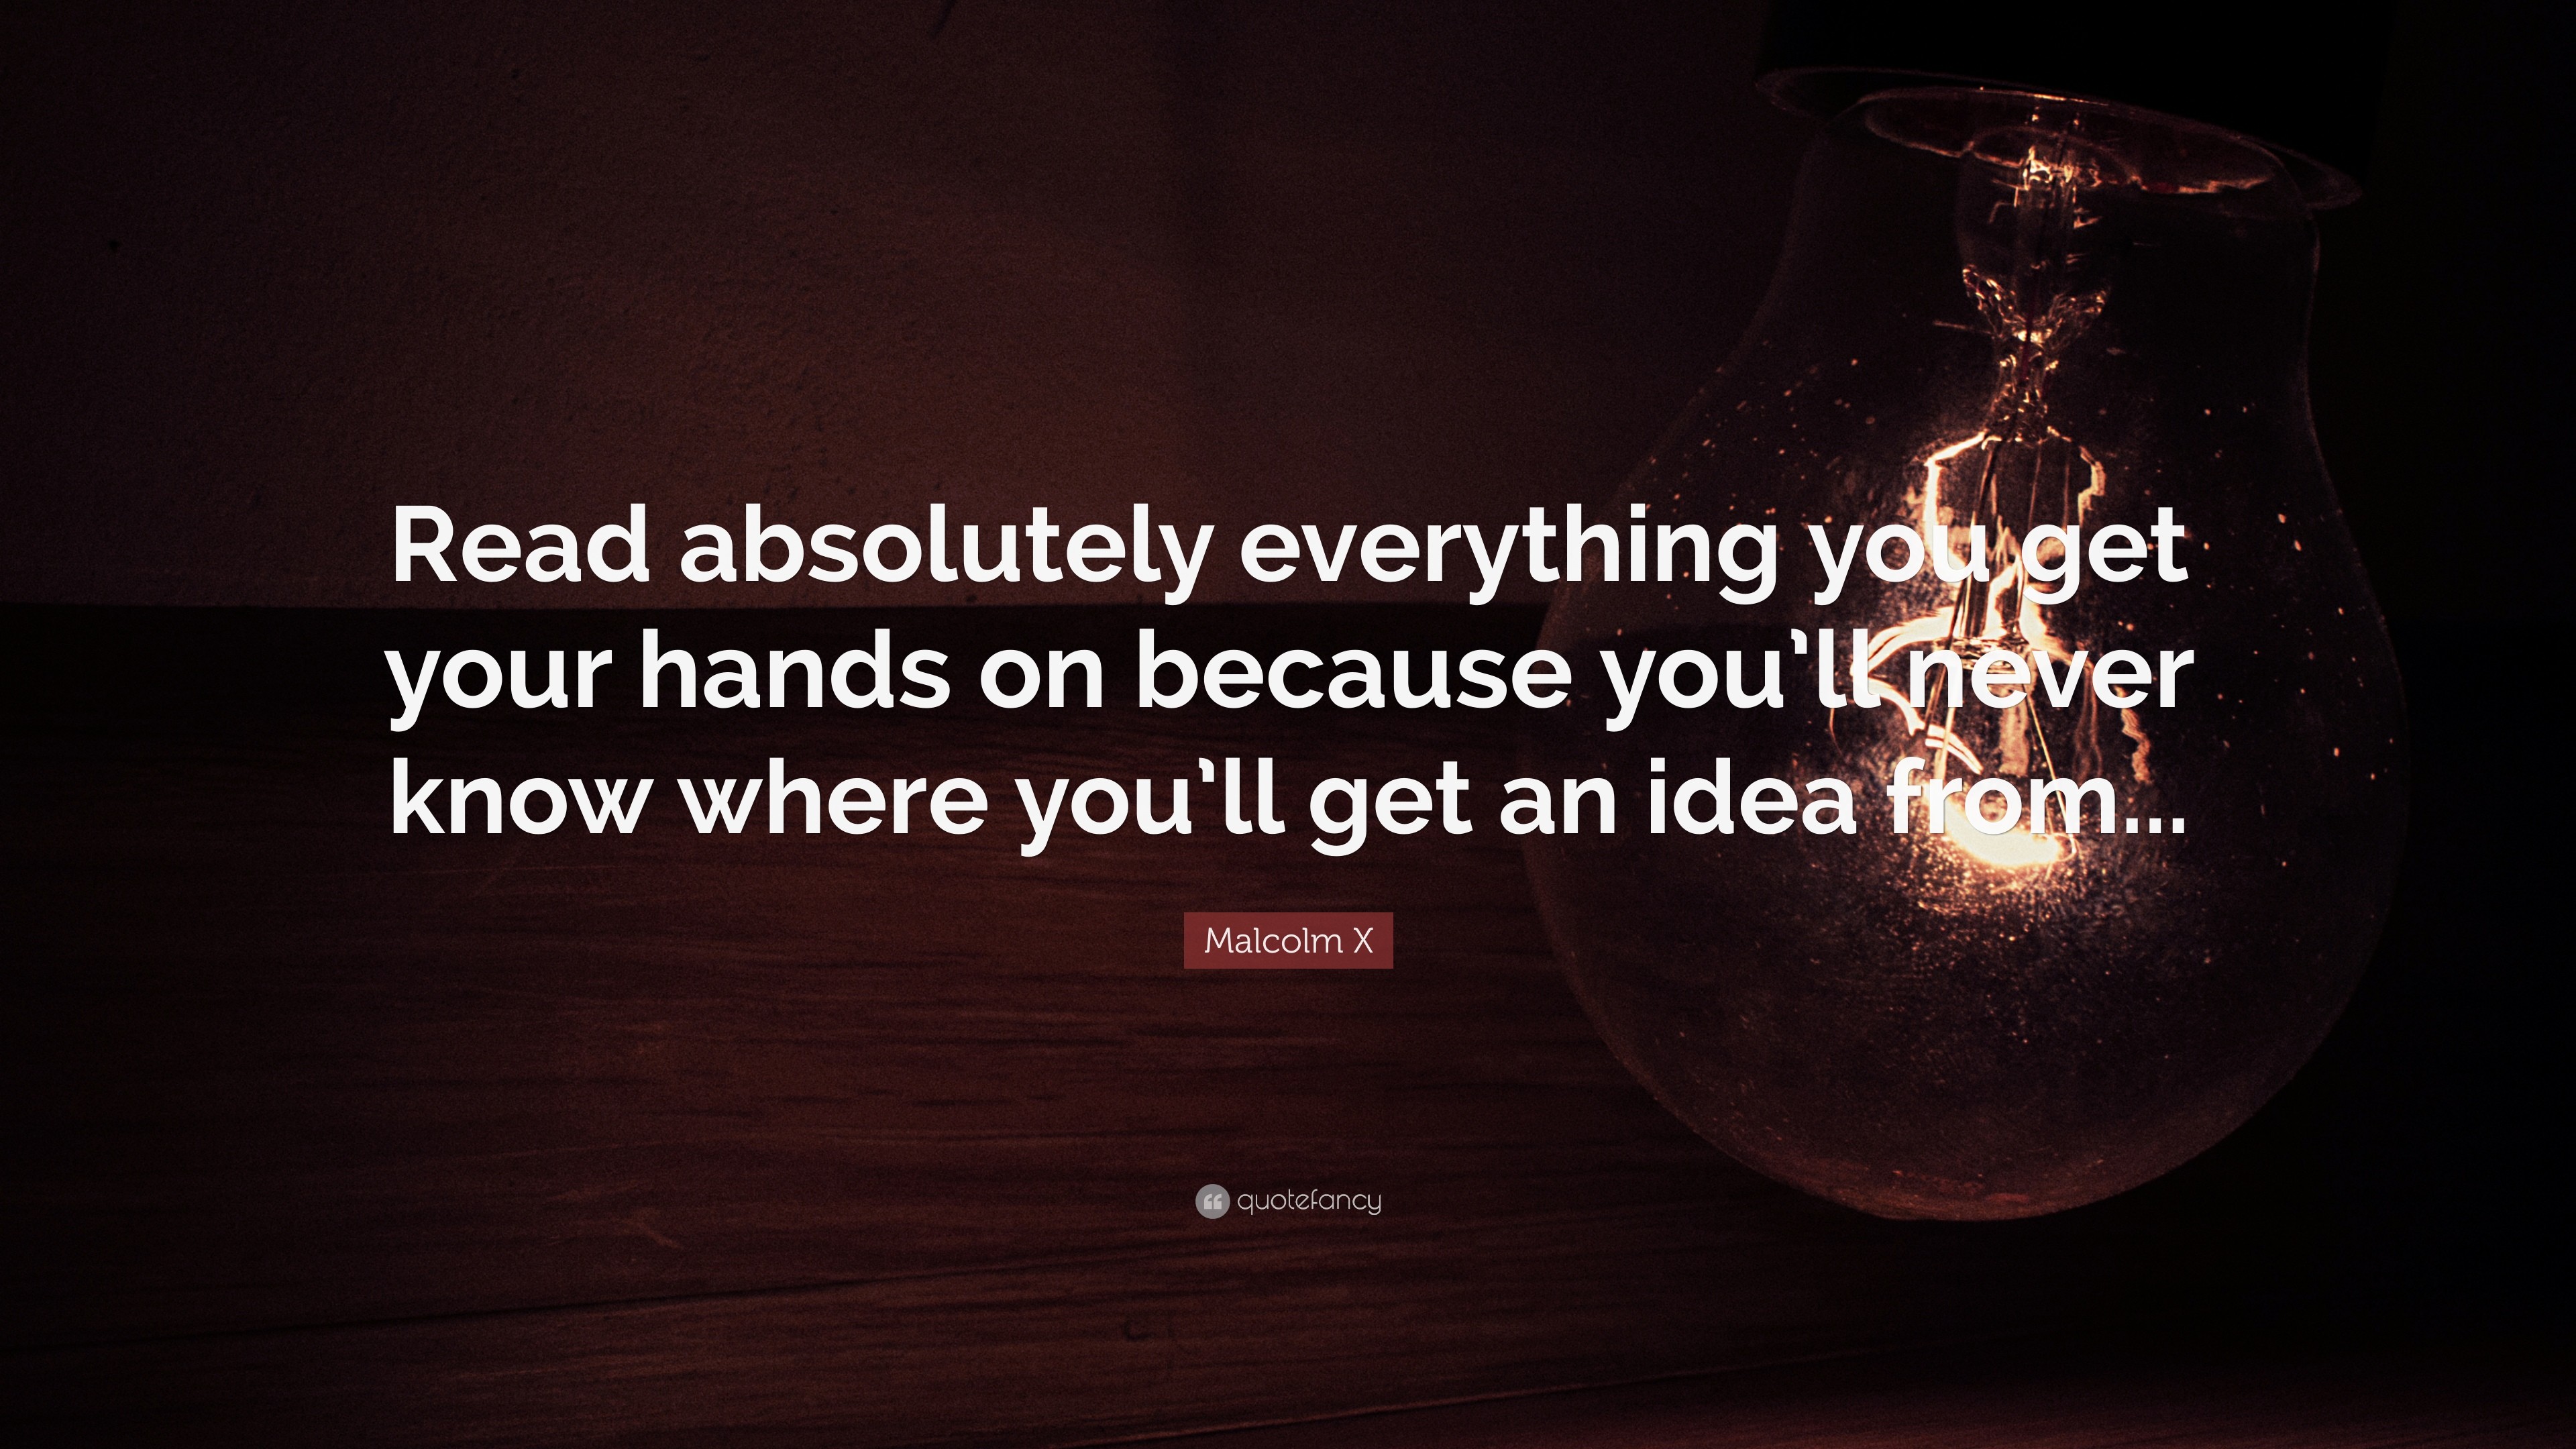 3840x2160 Malcolm X Quote: “Read absolutely everything you get your hands on because  you'